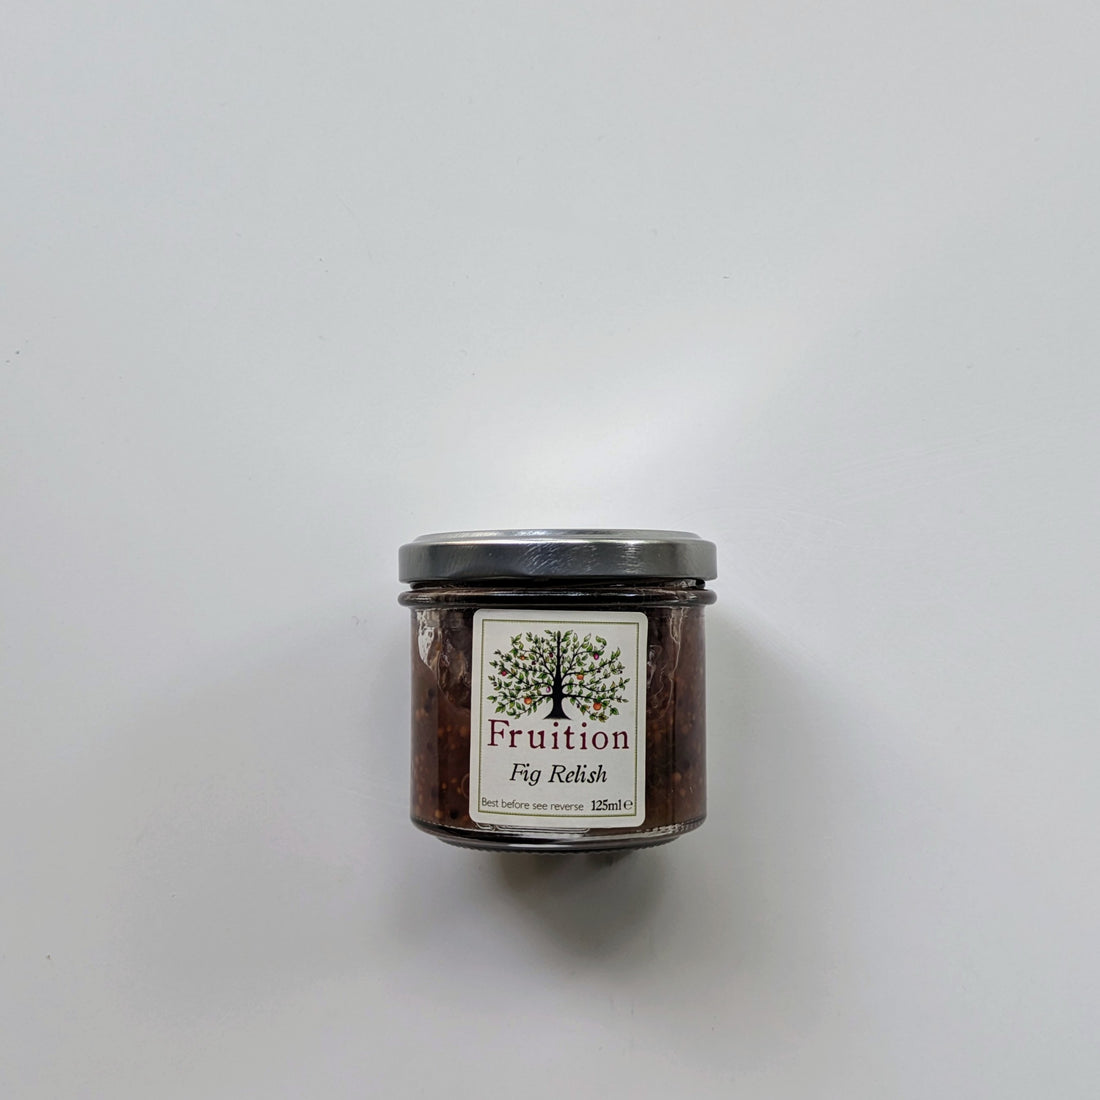 Fruition fig relish